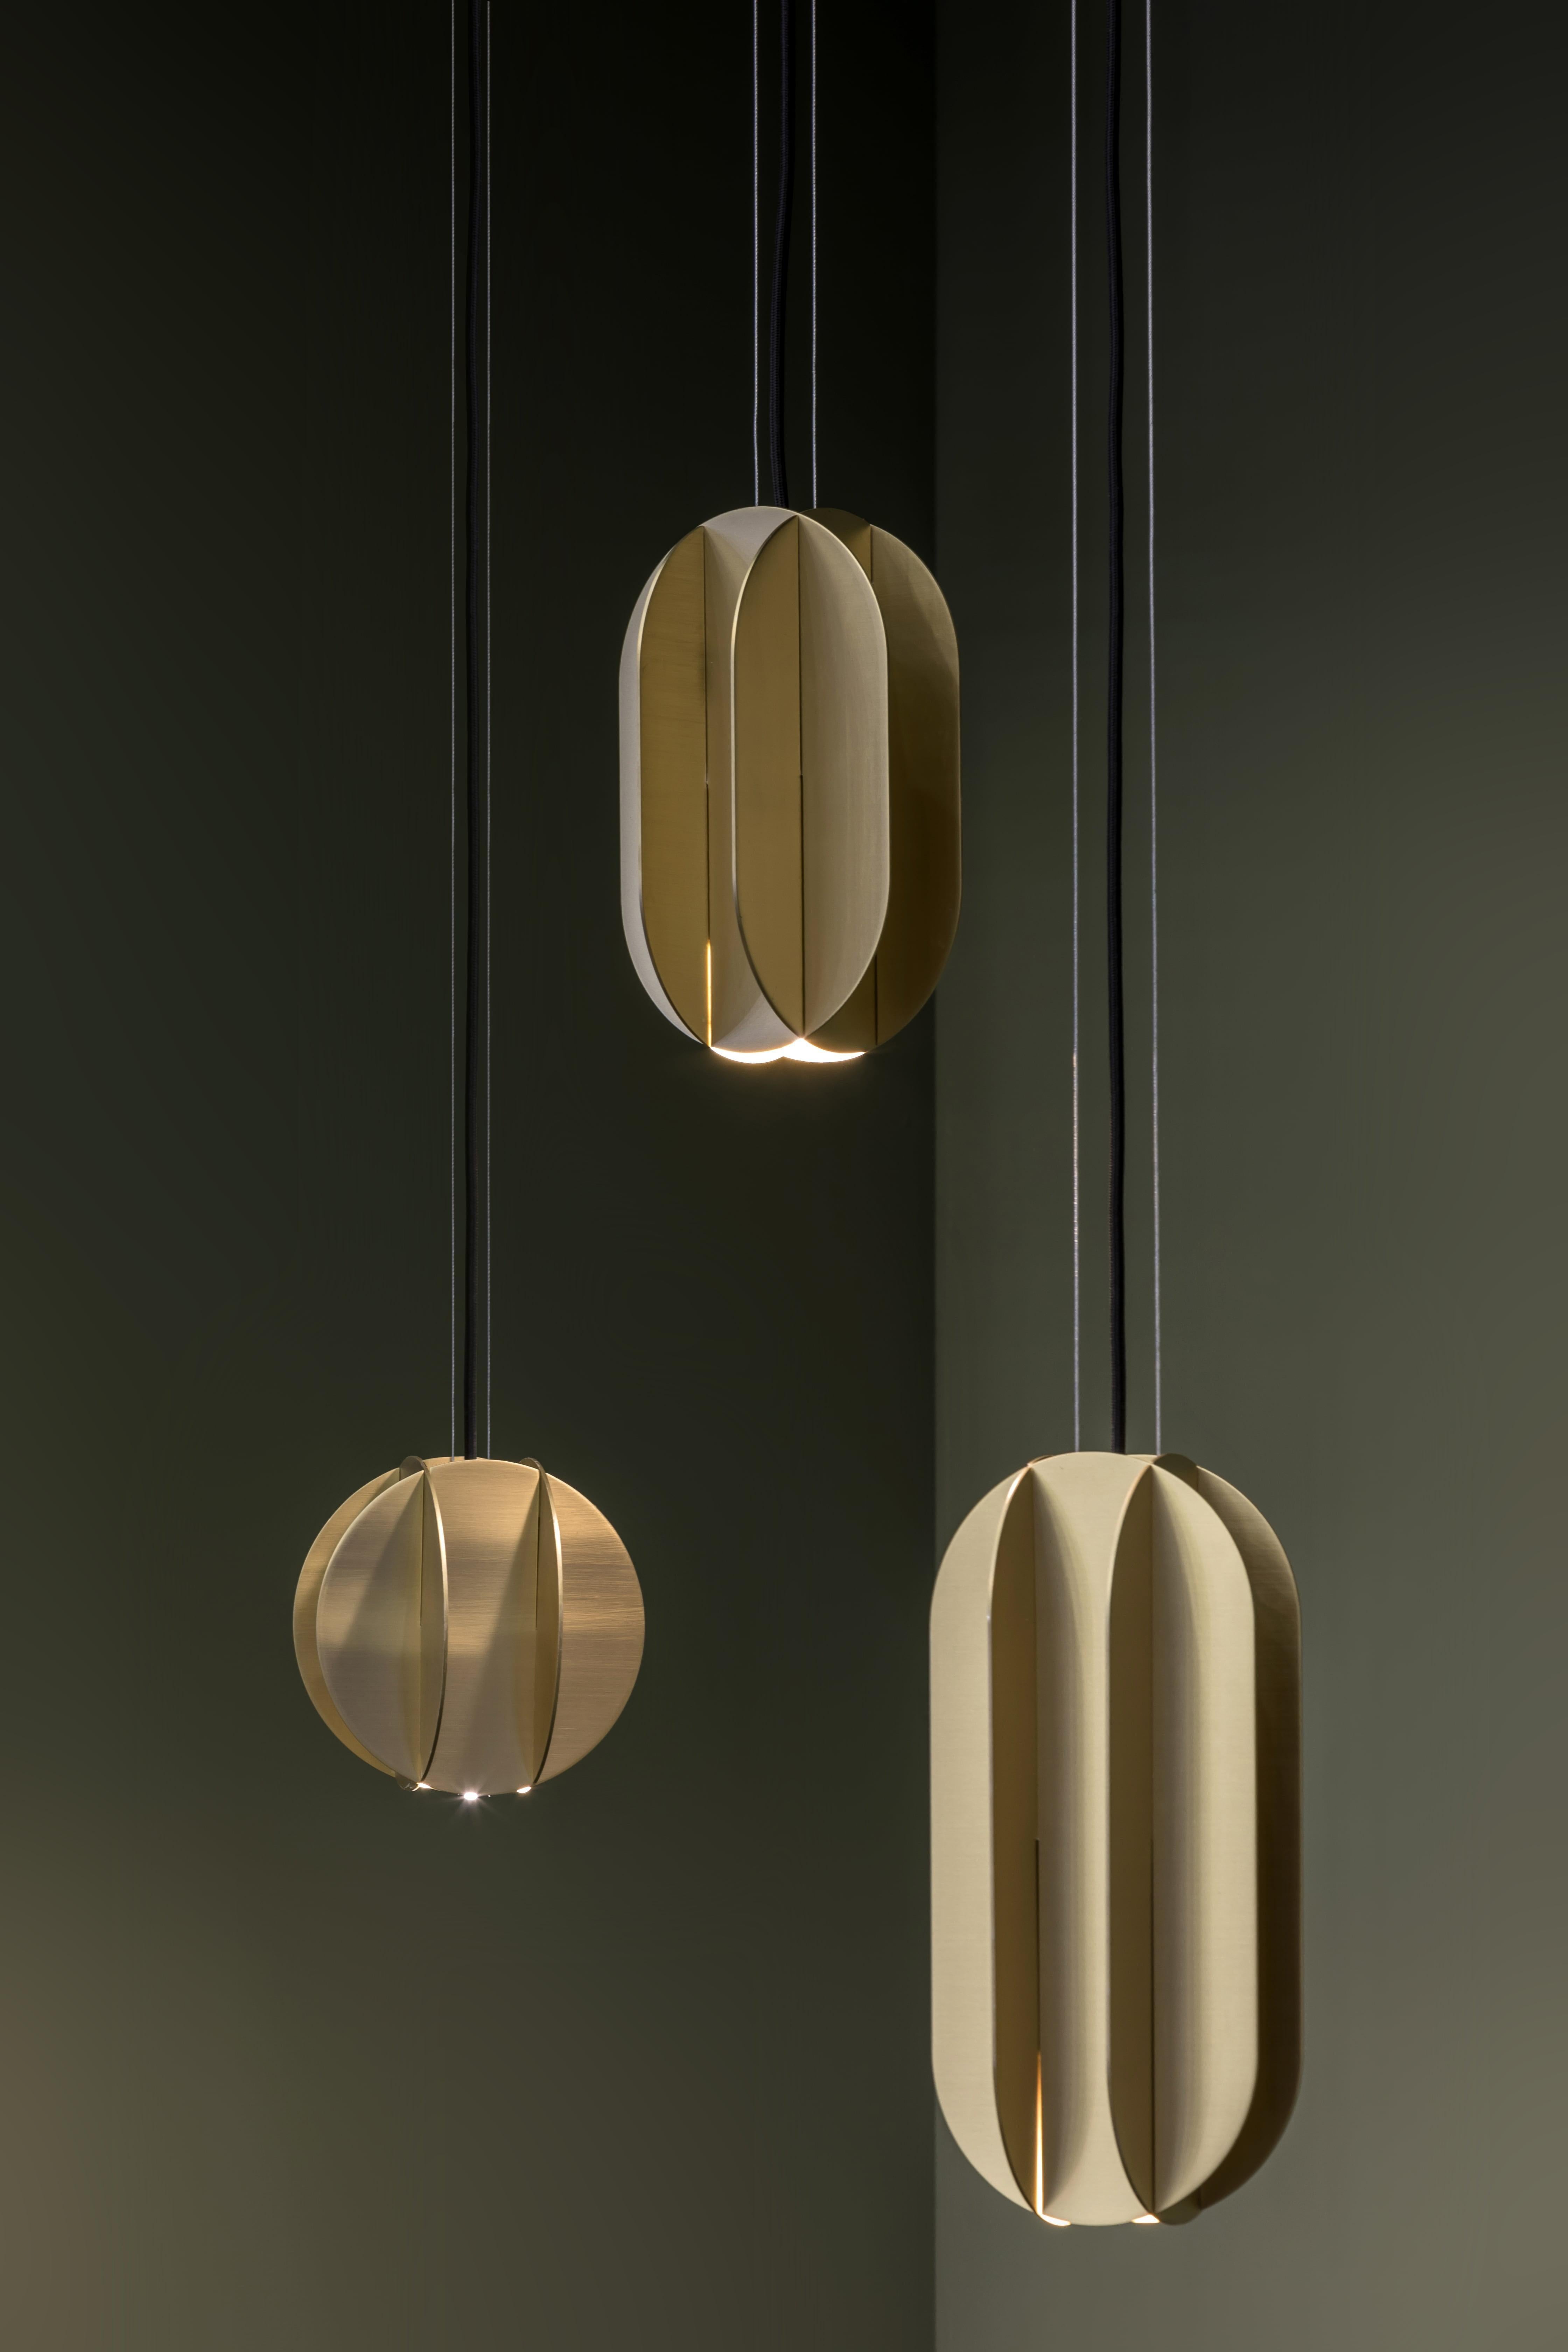 Brand: NOOM
Designer: Kateryna Sokolova
Materials: Brass
Dimensions: H 15 cm x W 15 cm x D 15 cm
Net Weight: 1,5 kg
Electrification: 2 × LED G9 10W.

EL collection of lighting is inspired by the geometric works of the great Suprematist artists El